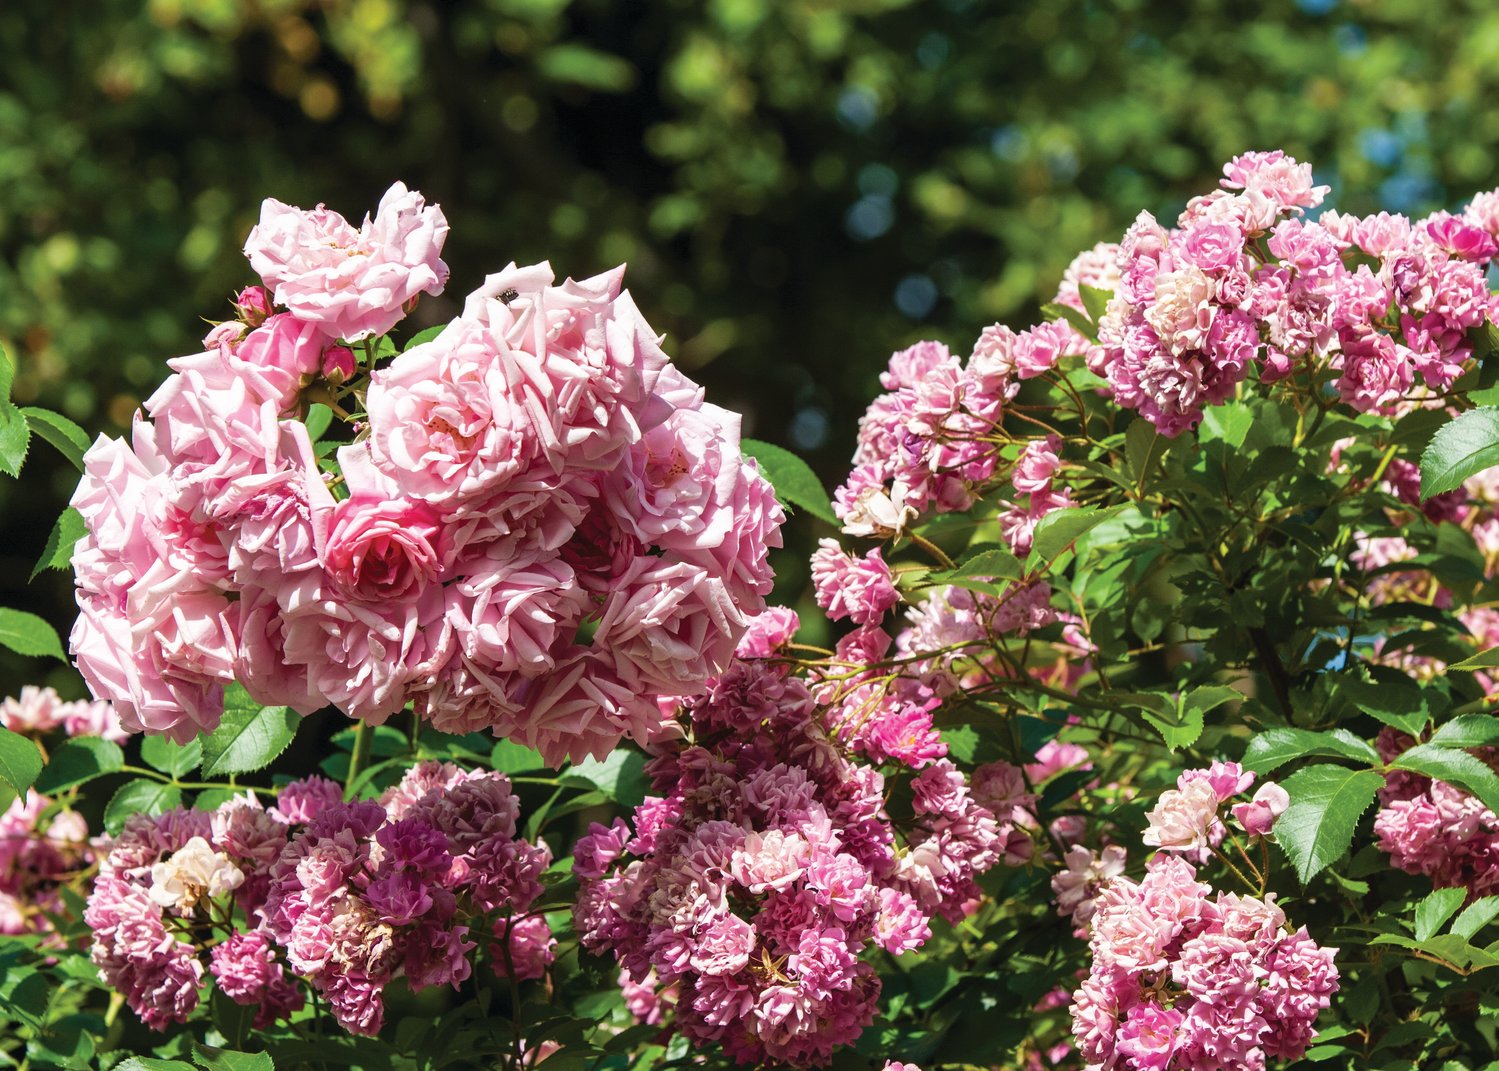 Abundant new wood and new flowers can result from moderate winter rose pruning, removing 1/3 to 2/3 of the plant. Late February to early March is a good time to prune modern roses.